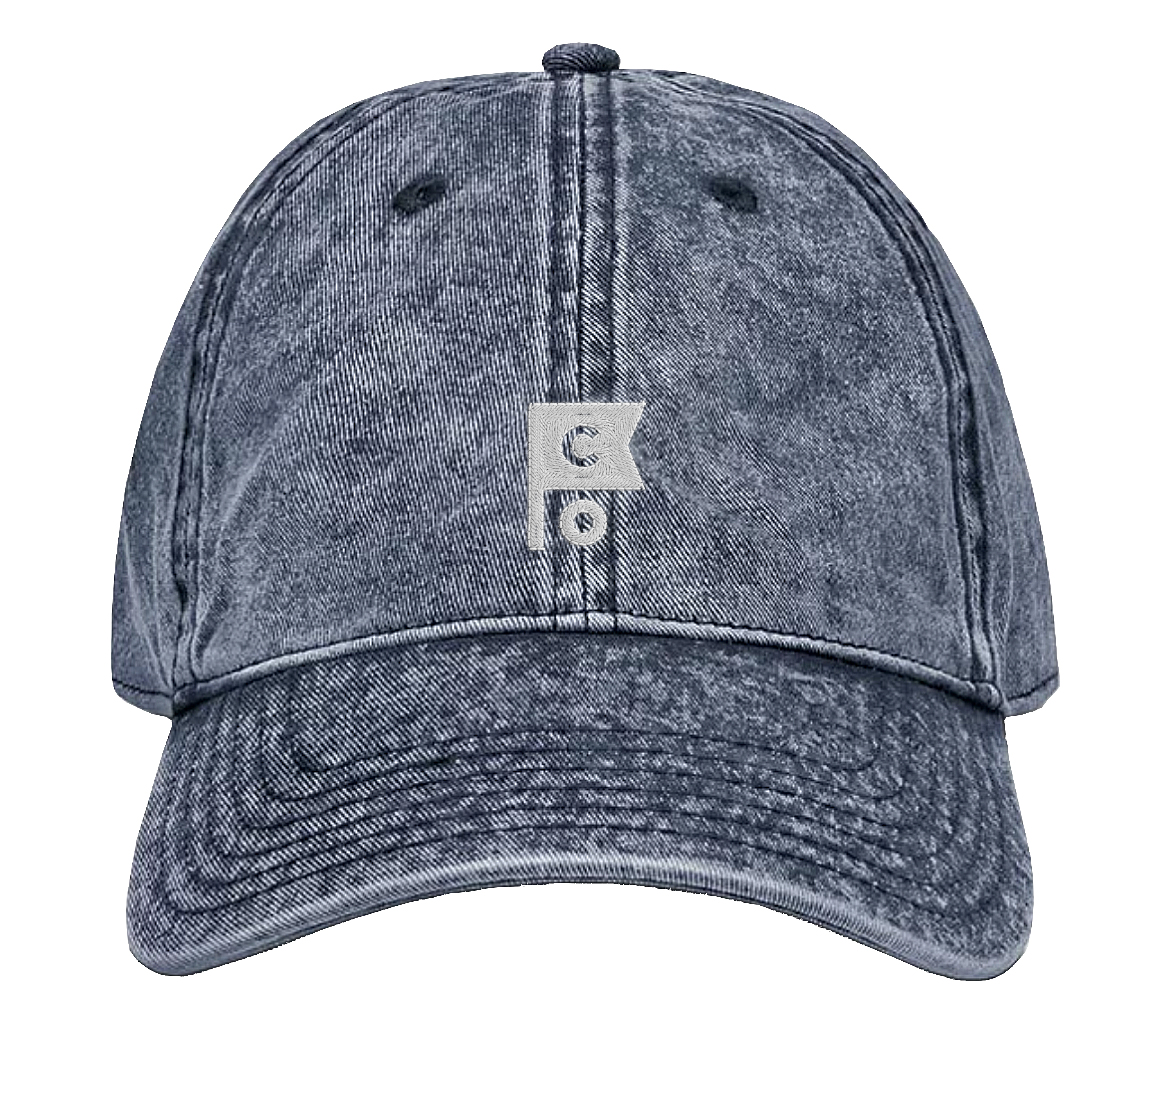 “Colorado Flag” – Embroidered Distressed Hat | Dylan Roop Design Co.